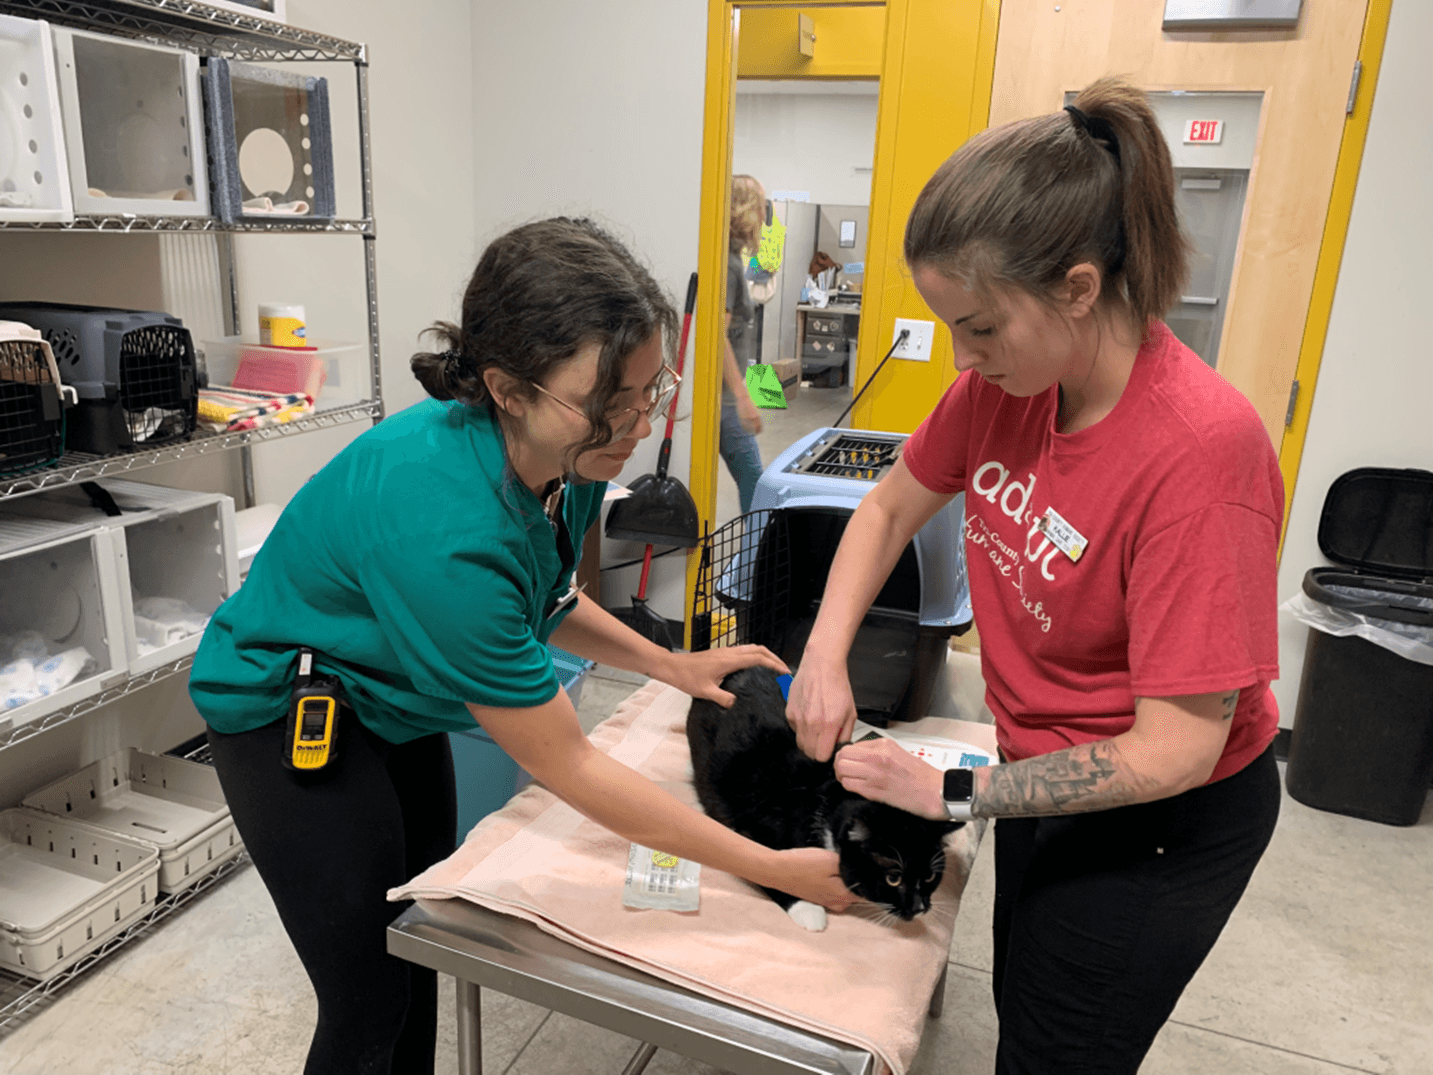 TCHS Pulls Off Microchip Clinic for the Public